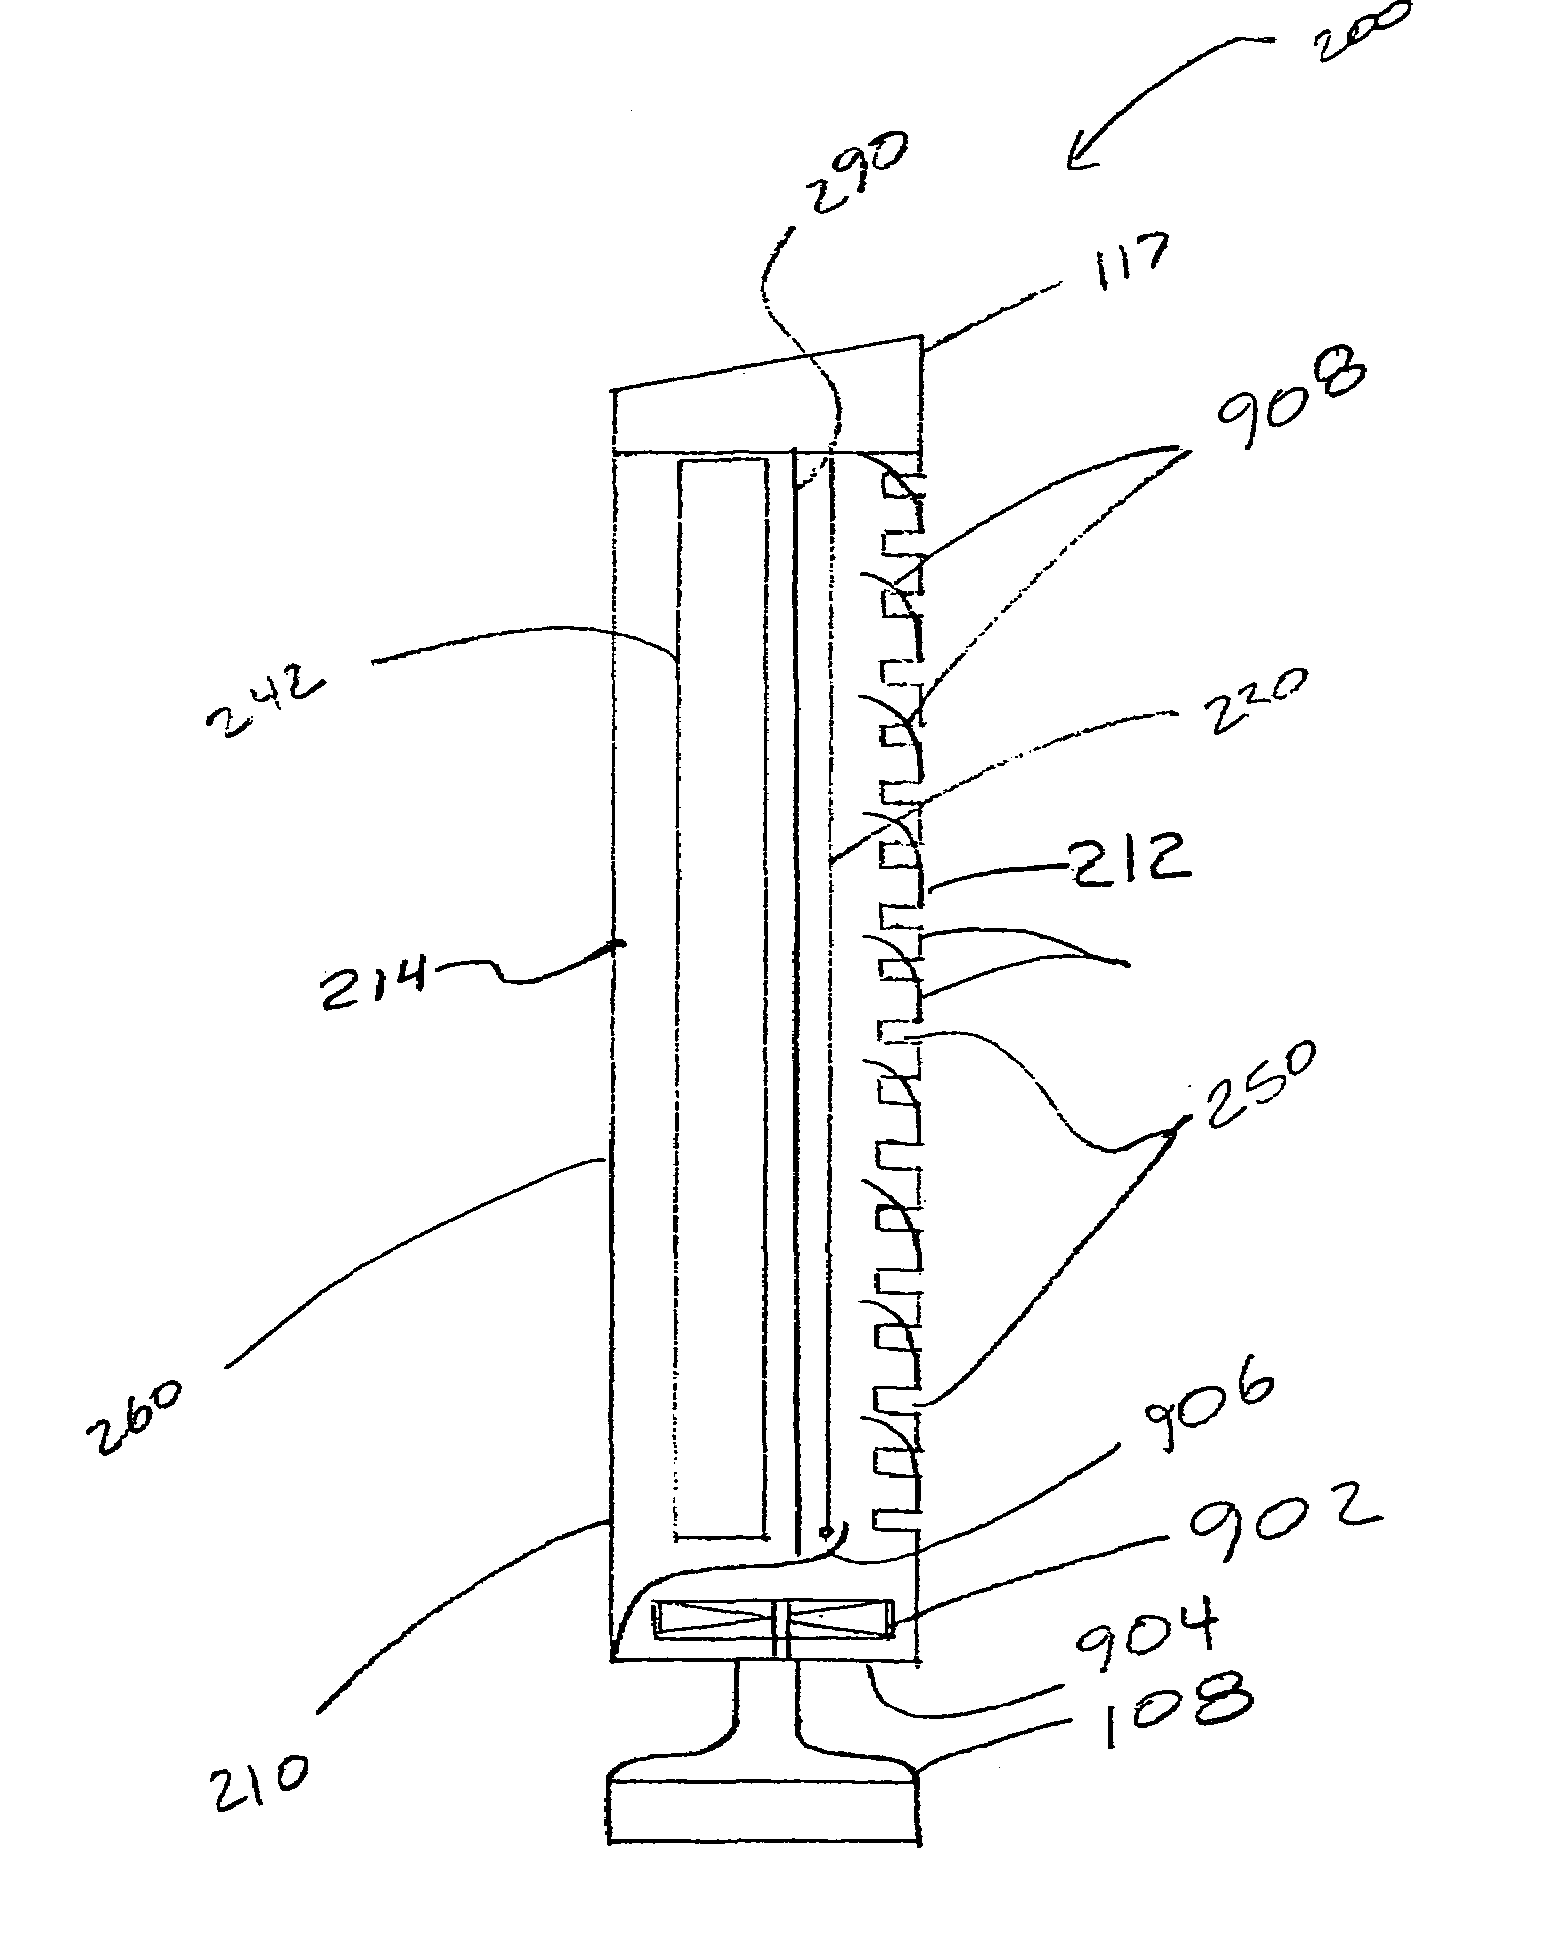 Air treatment apparatus having an electrode extending along an axis which is substantially perpendicular to an air flow path